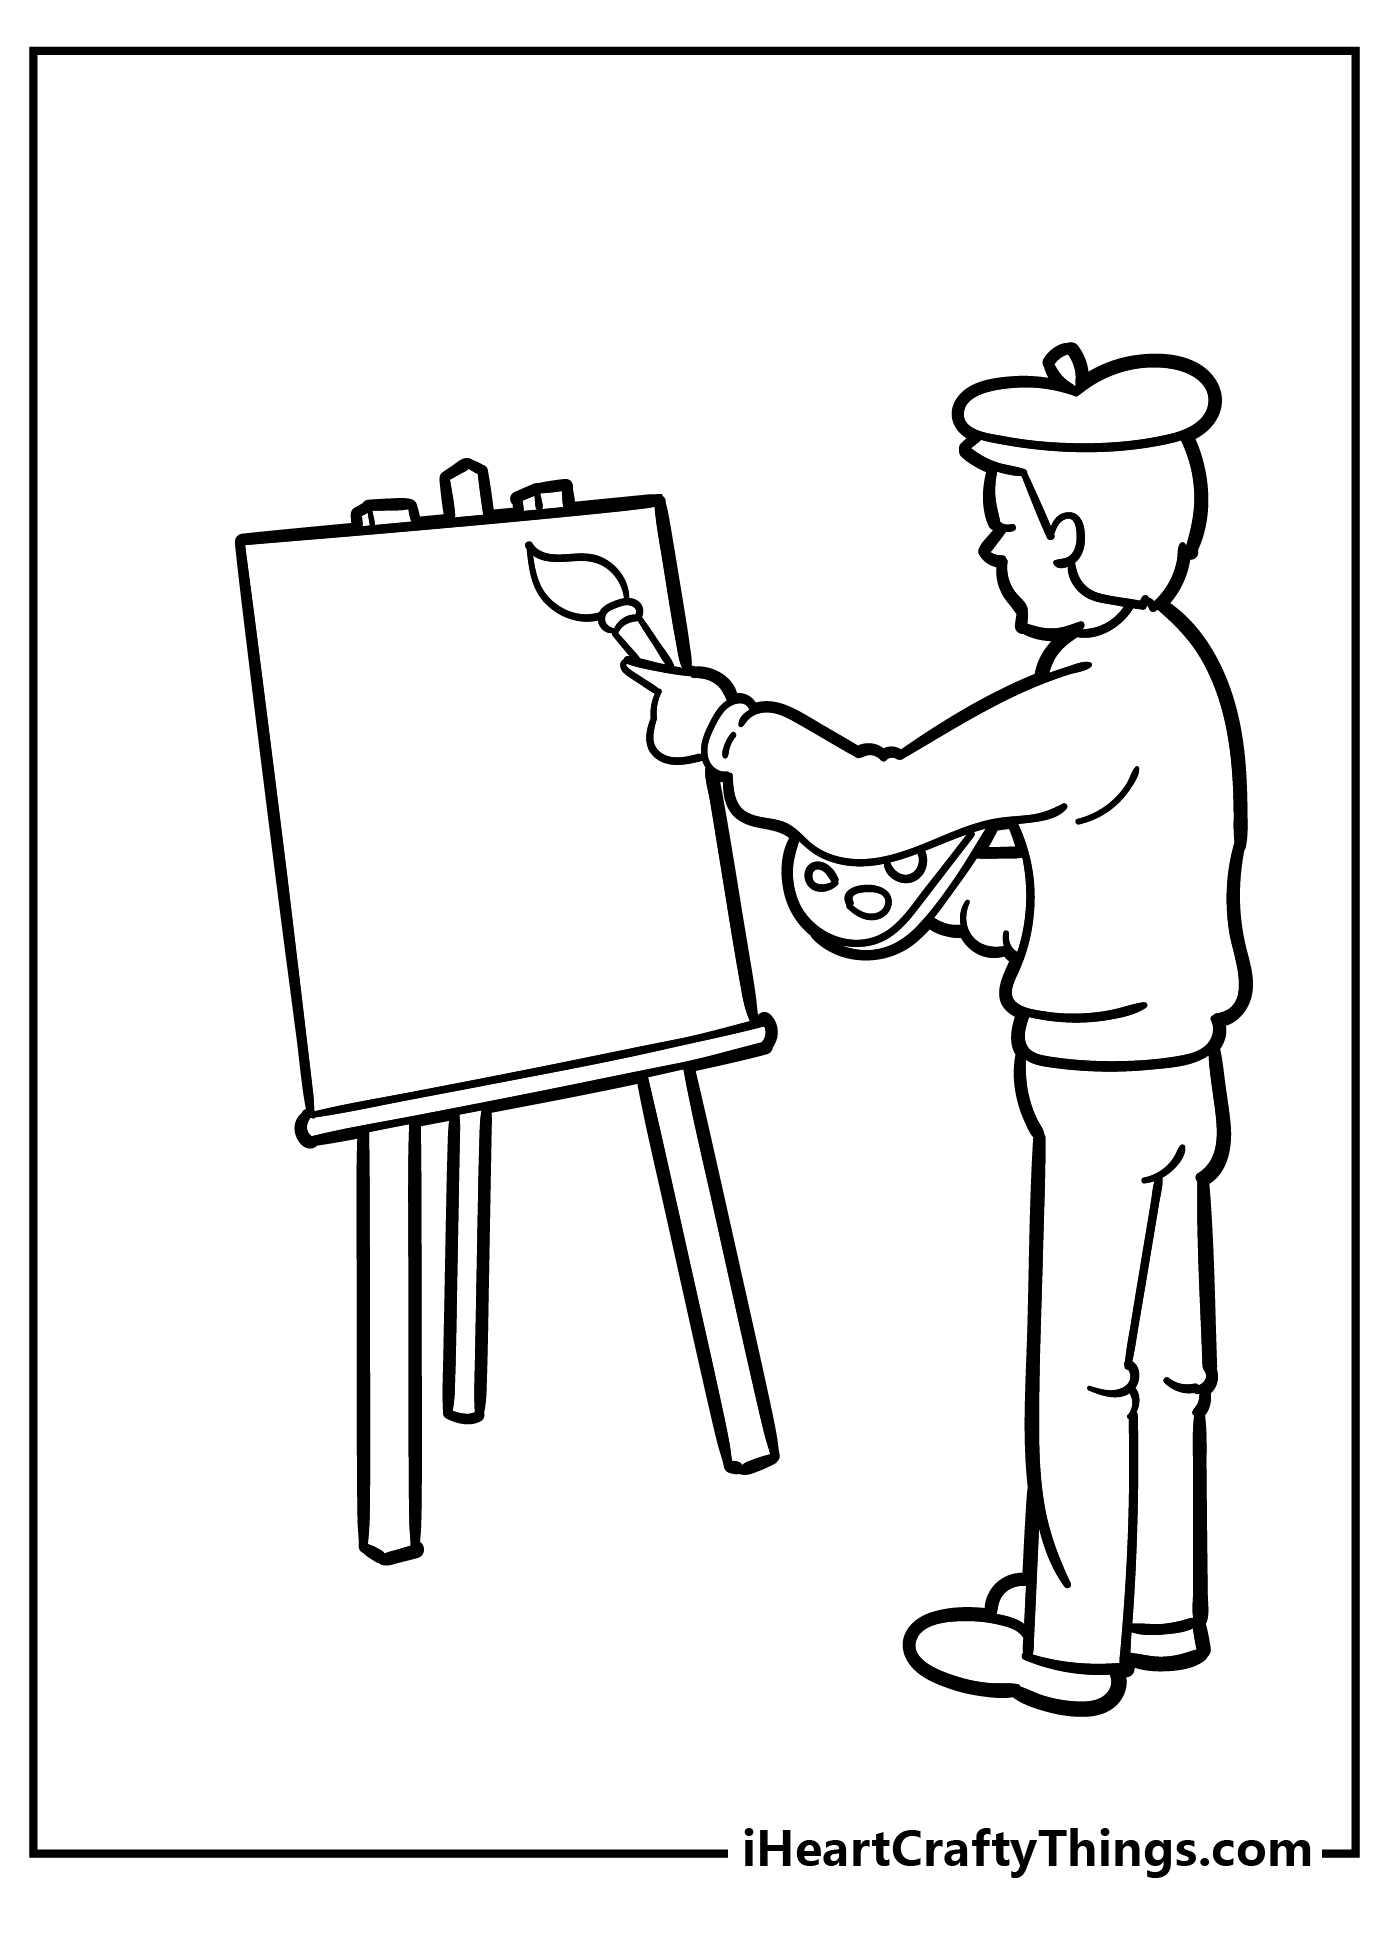 Painting Coloring Pages for preschoolers free printable